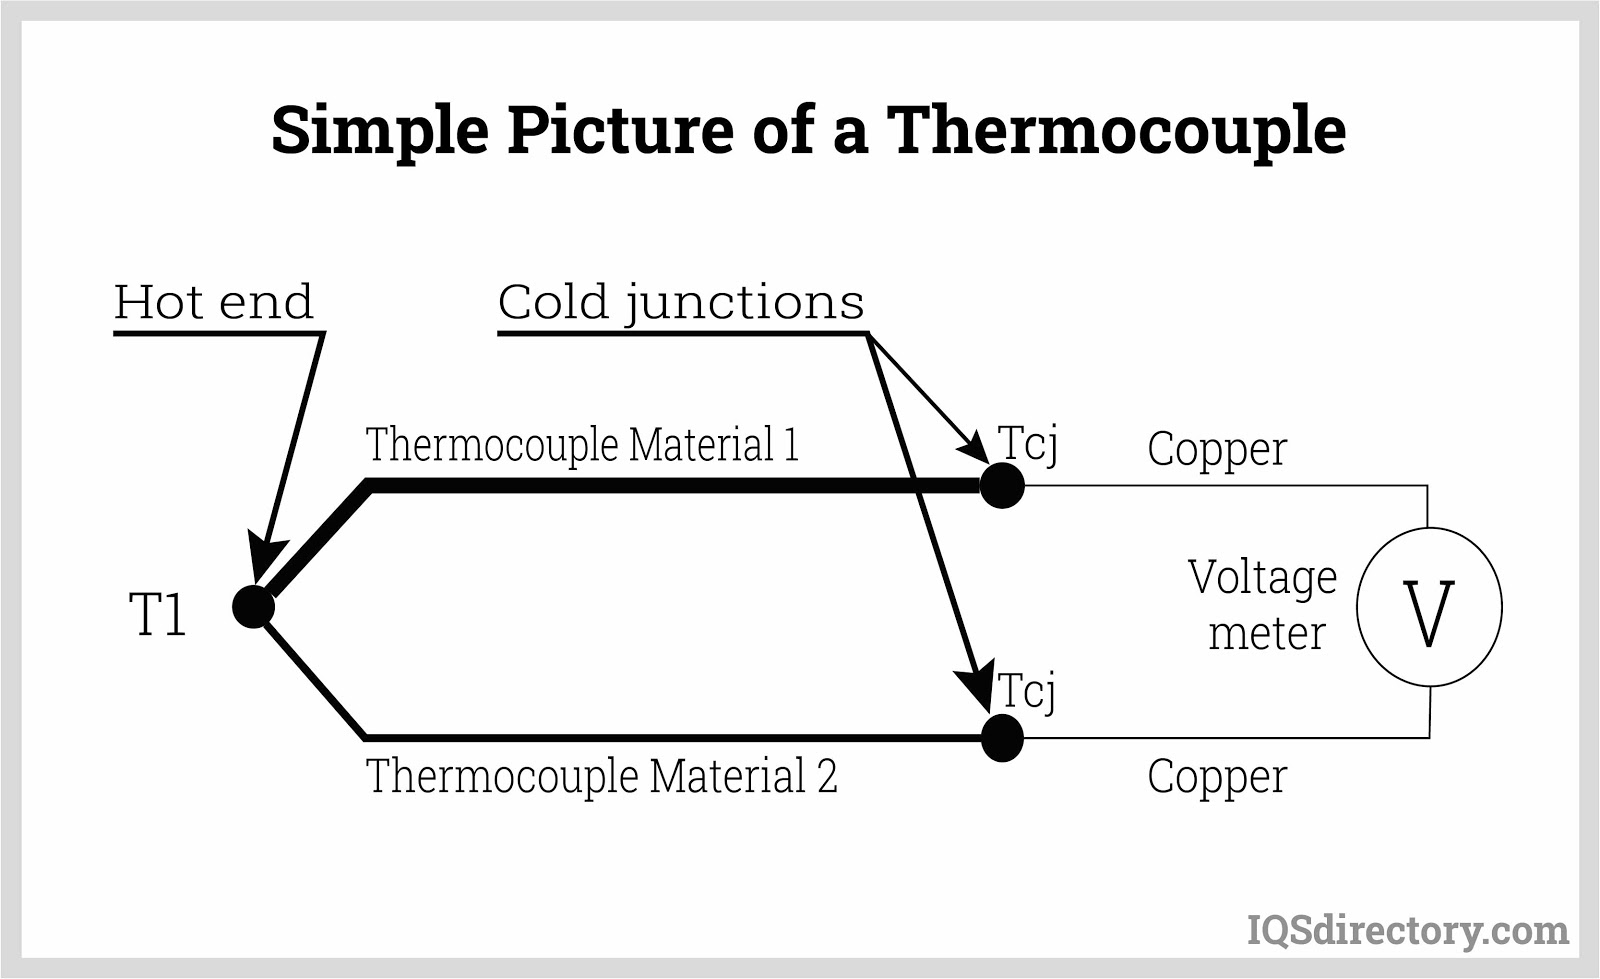 Simple Picture of a Thermocouple